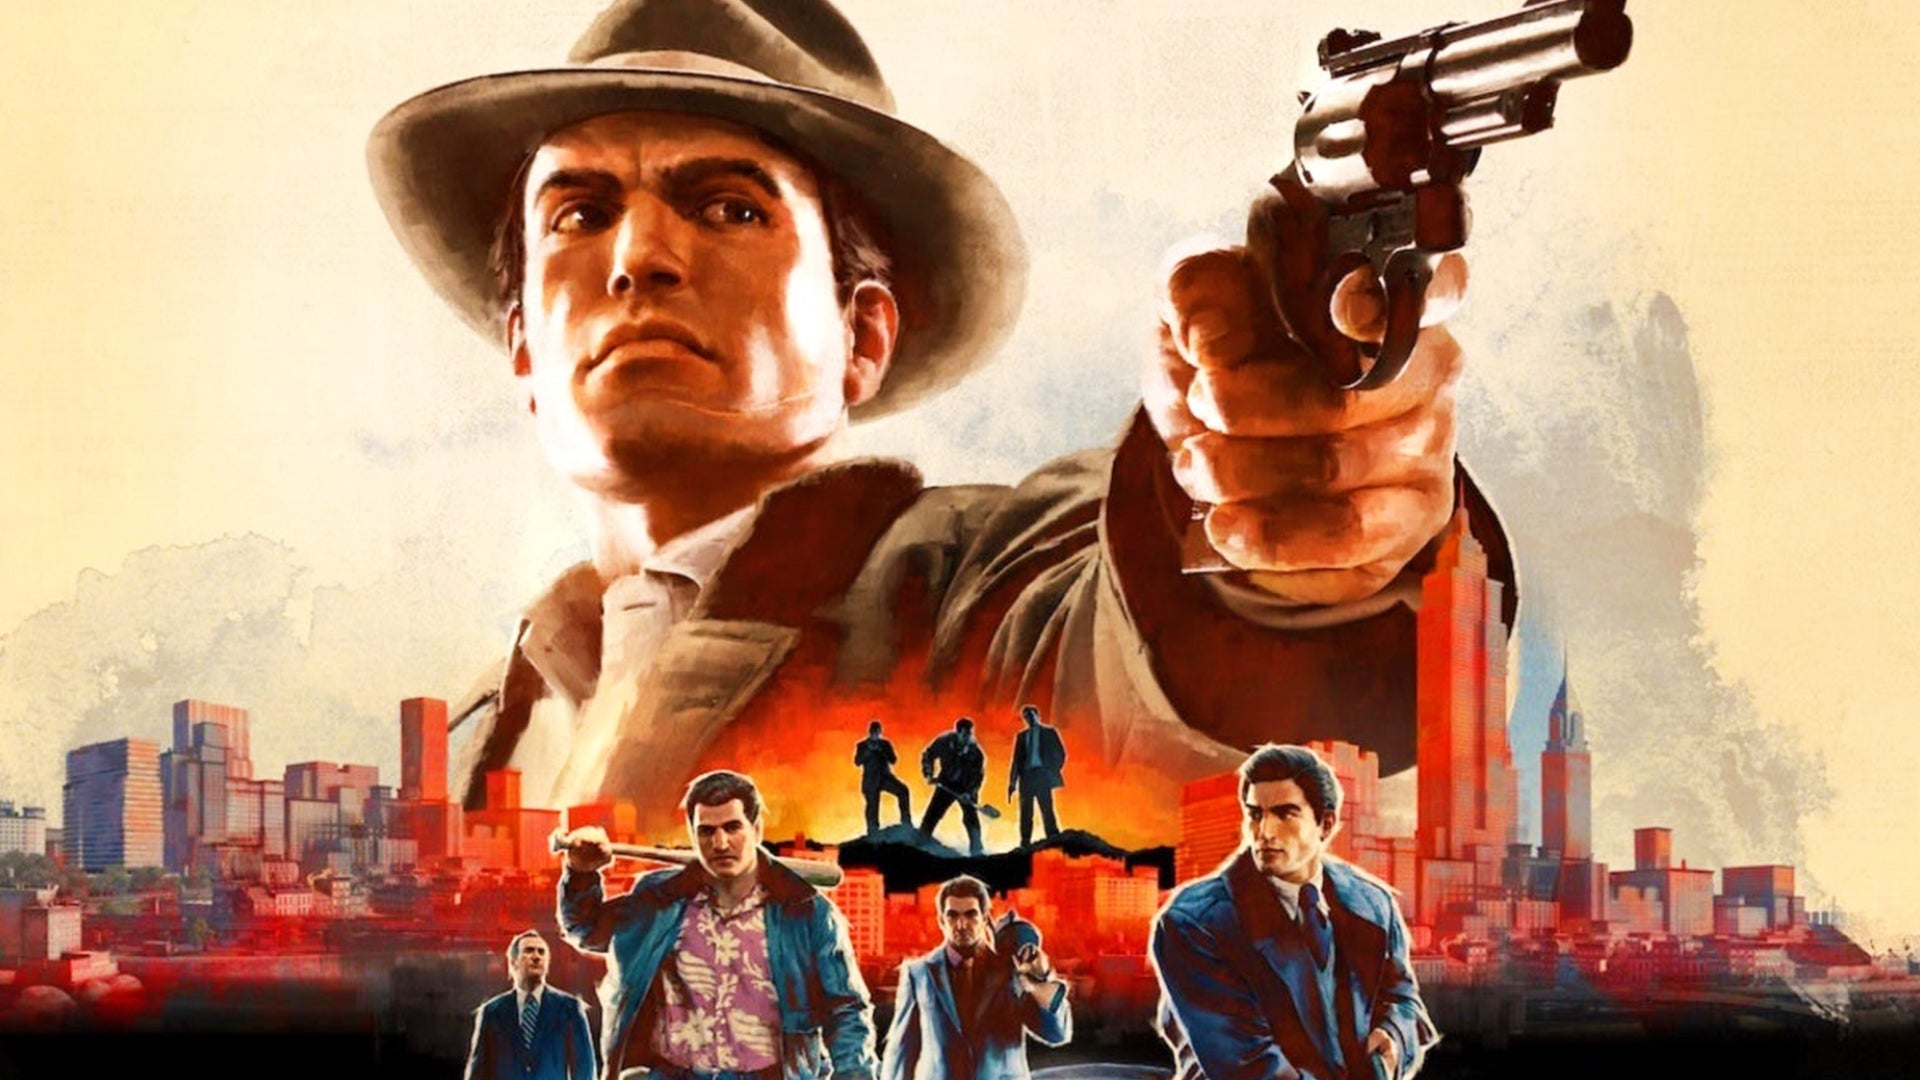 Image for Mafia 2 Definitive Edition - All Consoles Tested - What's Up with PS4 Pro Performance?